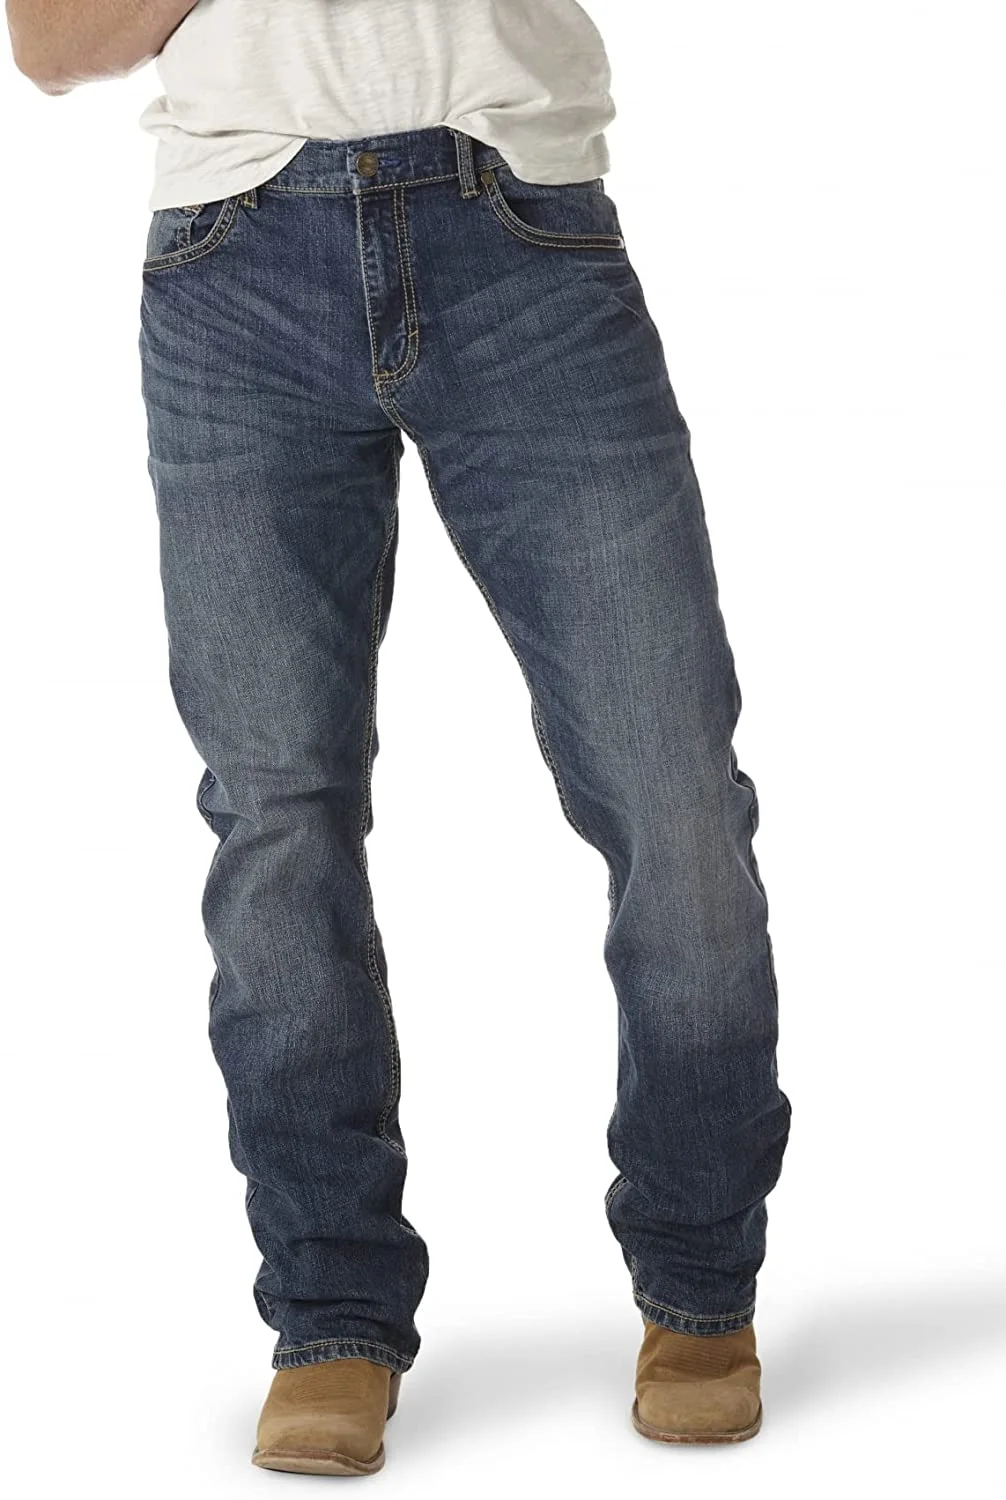 Wholesale Mens Regular Fit Jeans Jeans Manufacturer In Bangladesh Factory And Supplier